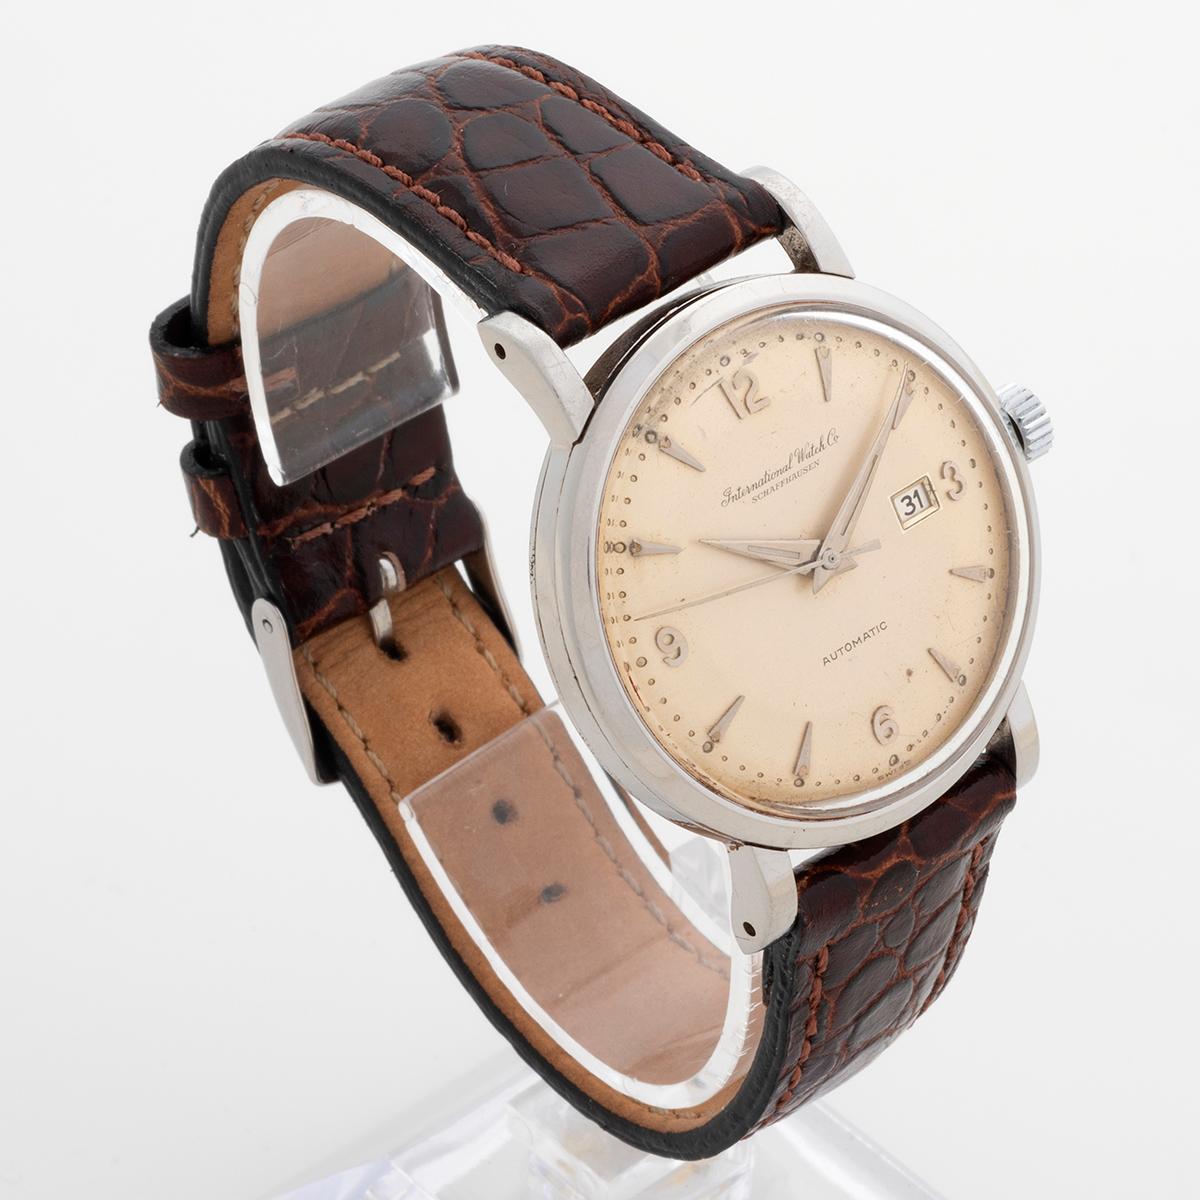 Our vintage IWC automatic features a large stainless steel case of 35mm and has a date function and is powered by a 21 jewel movement. Of note is the attractive lightly patinated dial. A new leather strap and tang buckle are fitted and a IWC Service